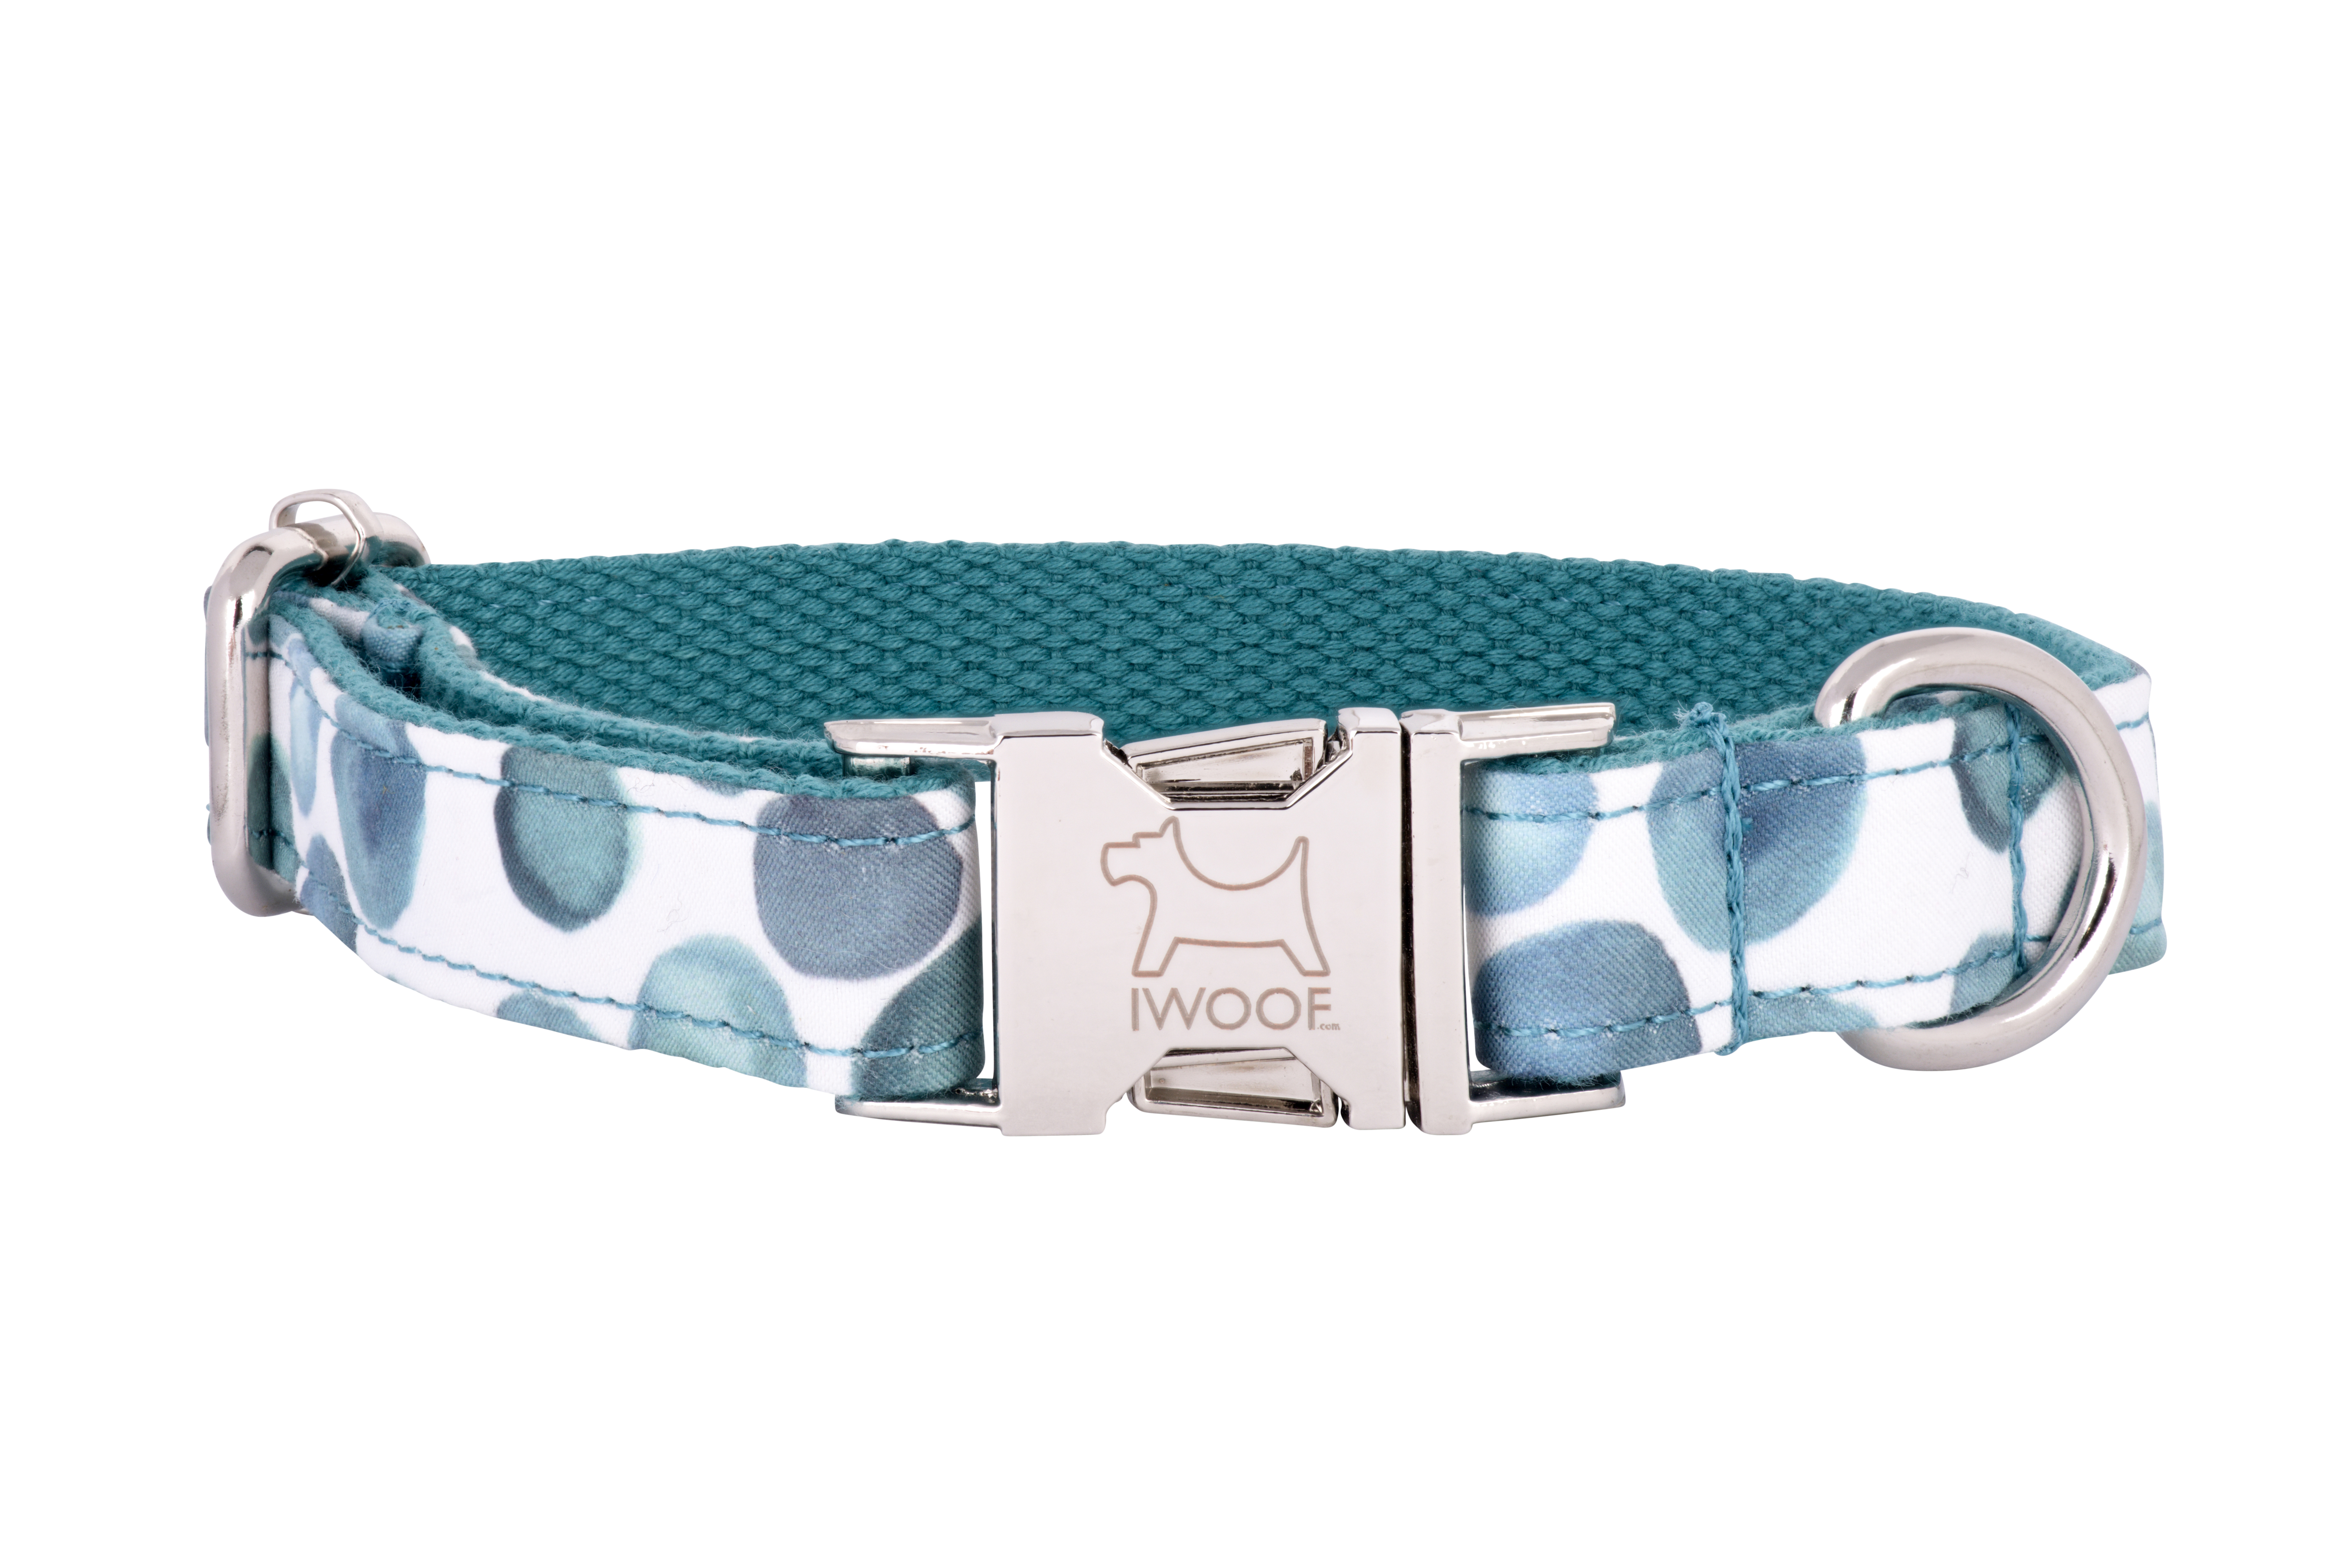 Bubbles designer dog collar and matching dog lead by IWOOF